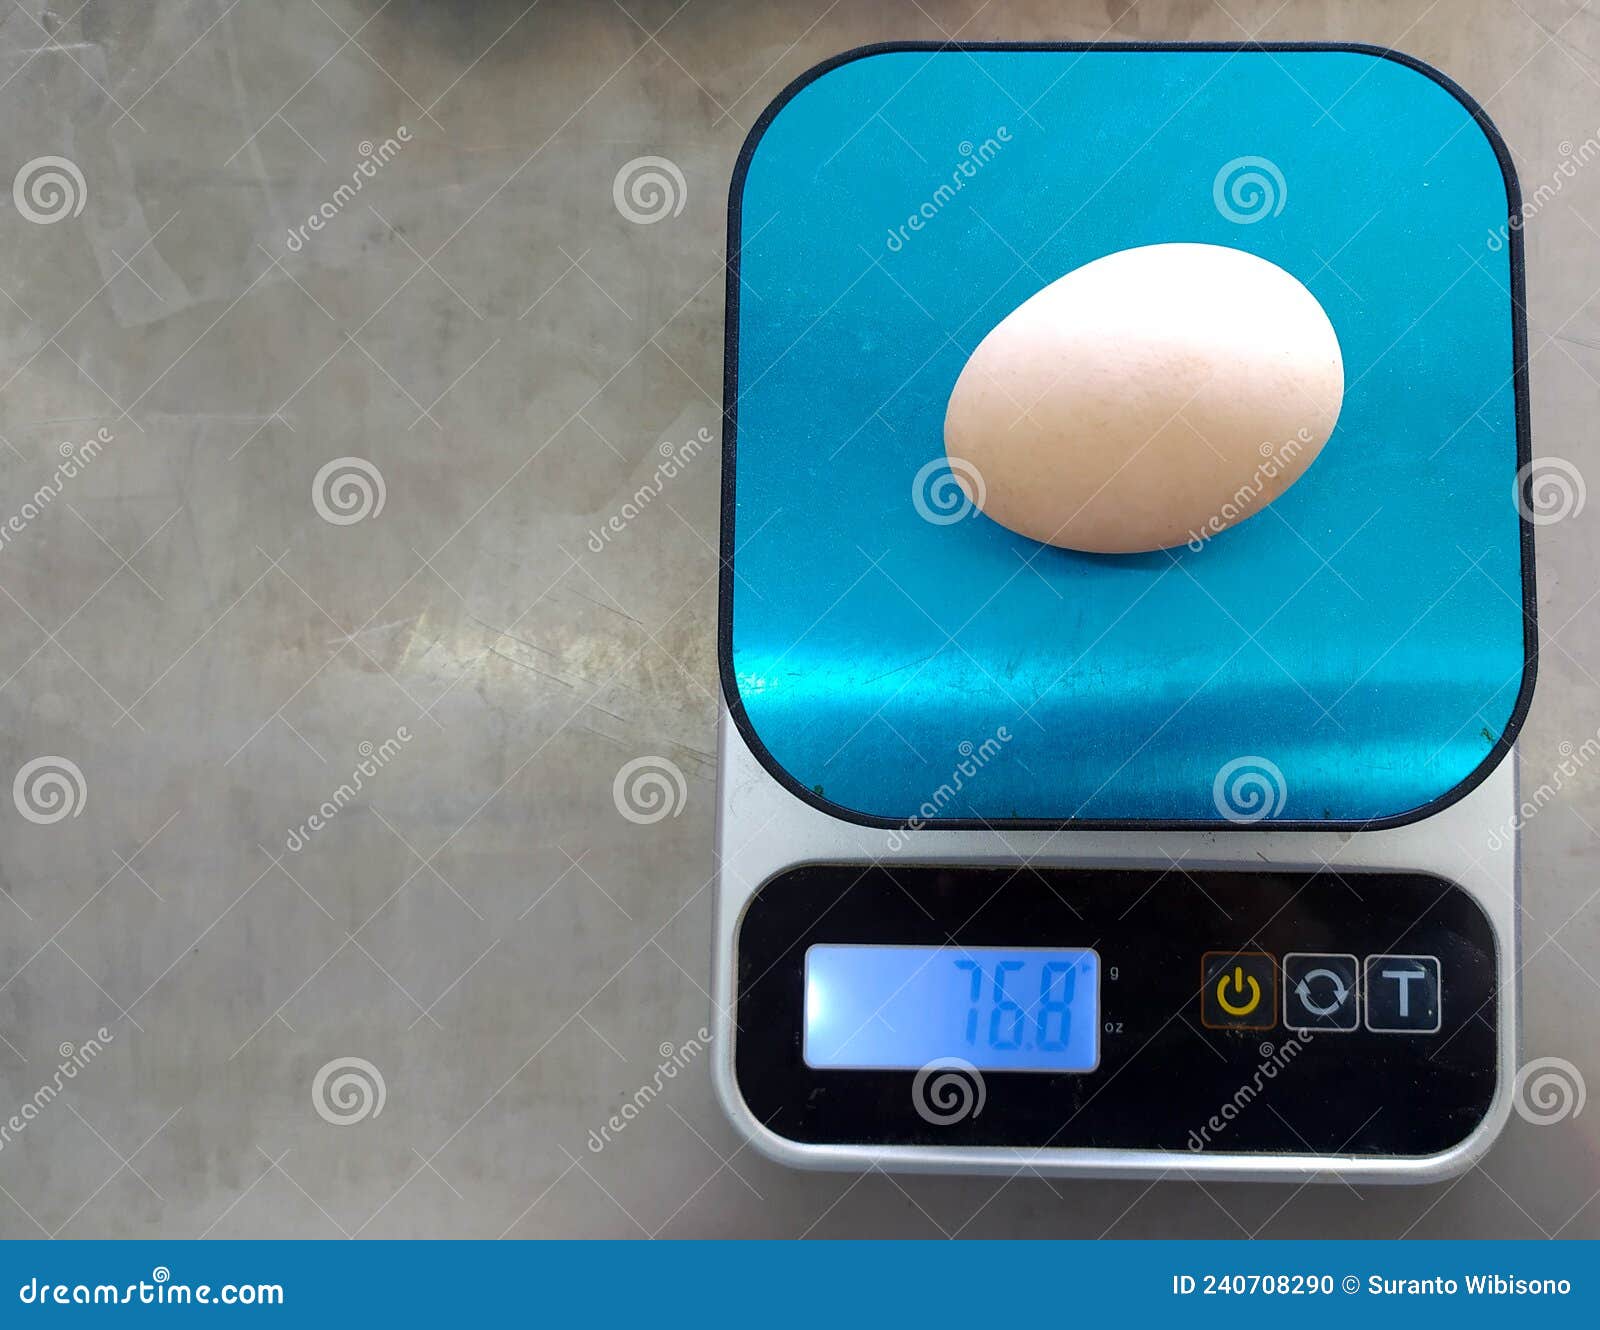 https://thumbs.dreamstime.com/z/view-top-egg-weighed-mini-digital-scale-hatching-eggs-egg-weighed-mini-digital-scale-hatching-eggs-240708290.jpg